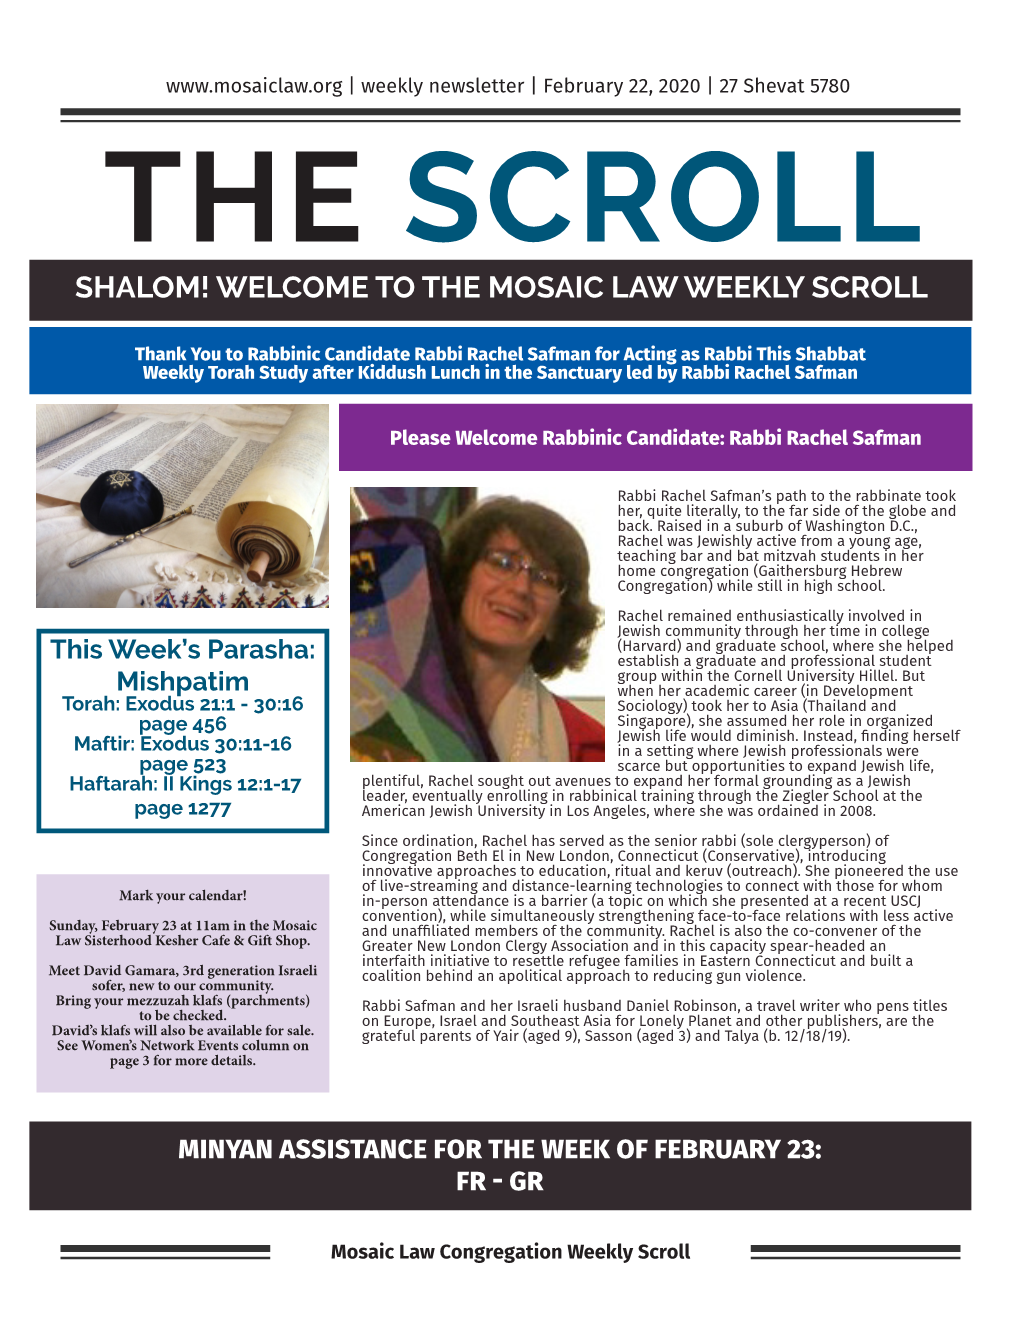 Shalom! Welcome to the Mosaic Law Weekly Scroll